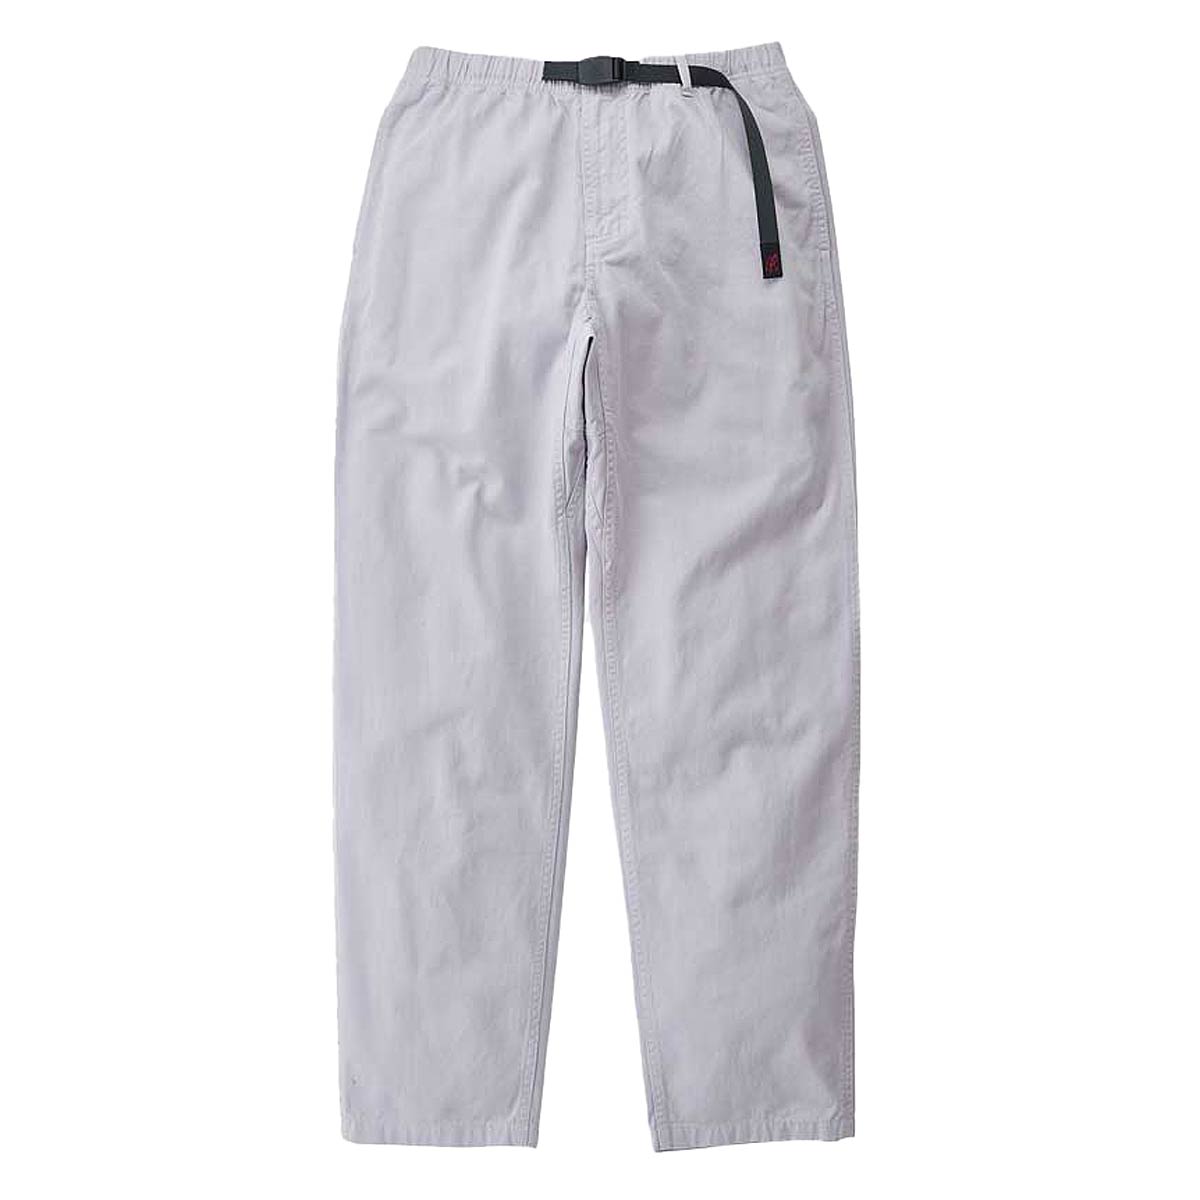 Image of Gramicci Pant, Dusty Lavender